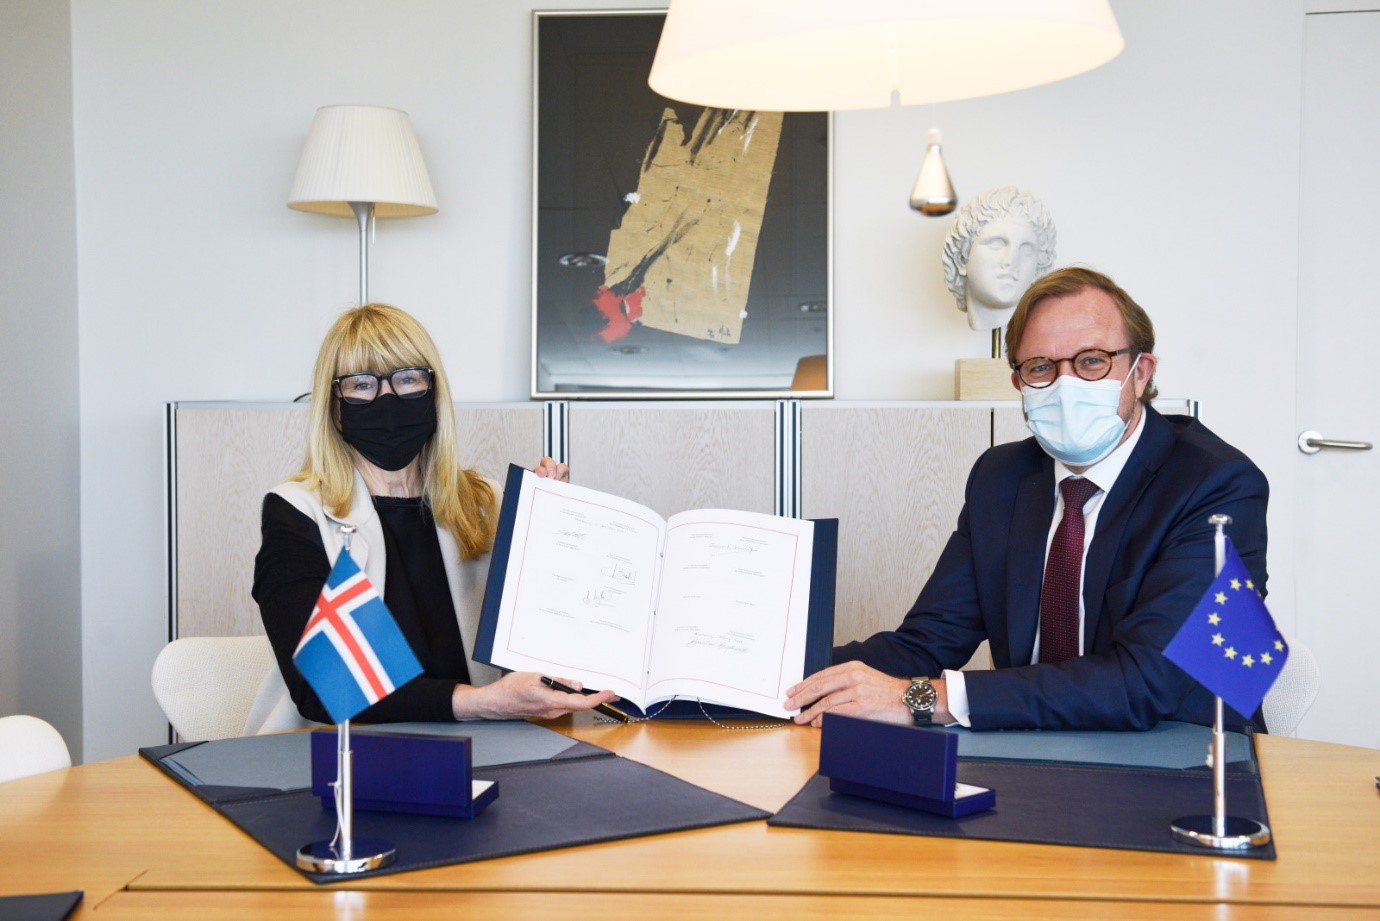 Iceland signs the Convention on safety, security and service in sport